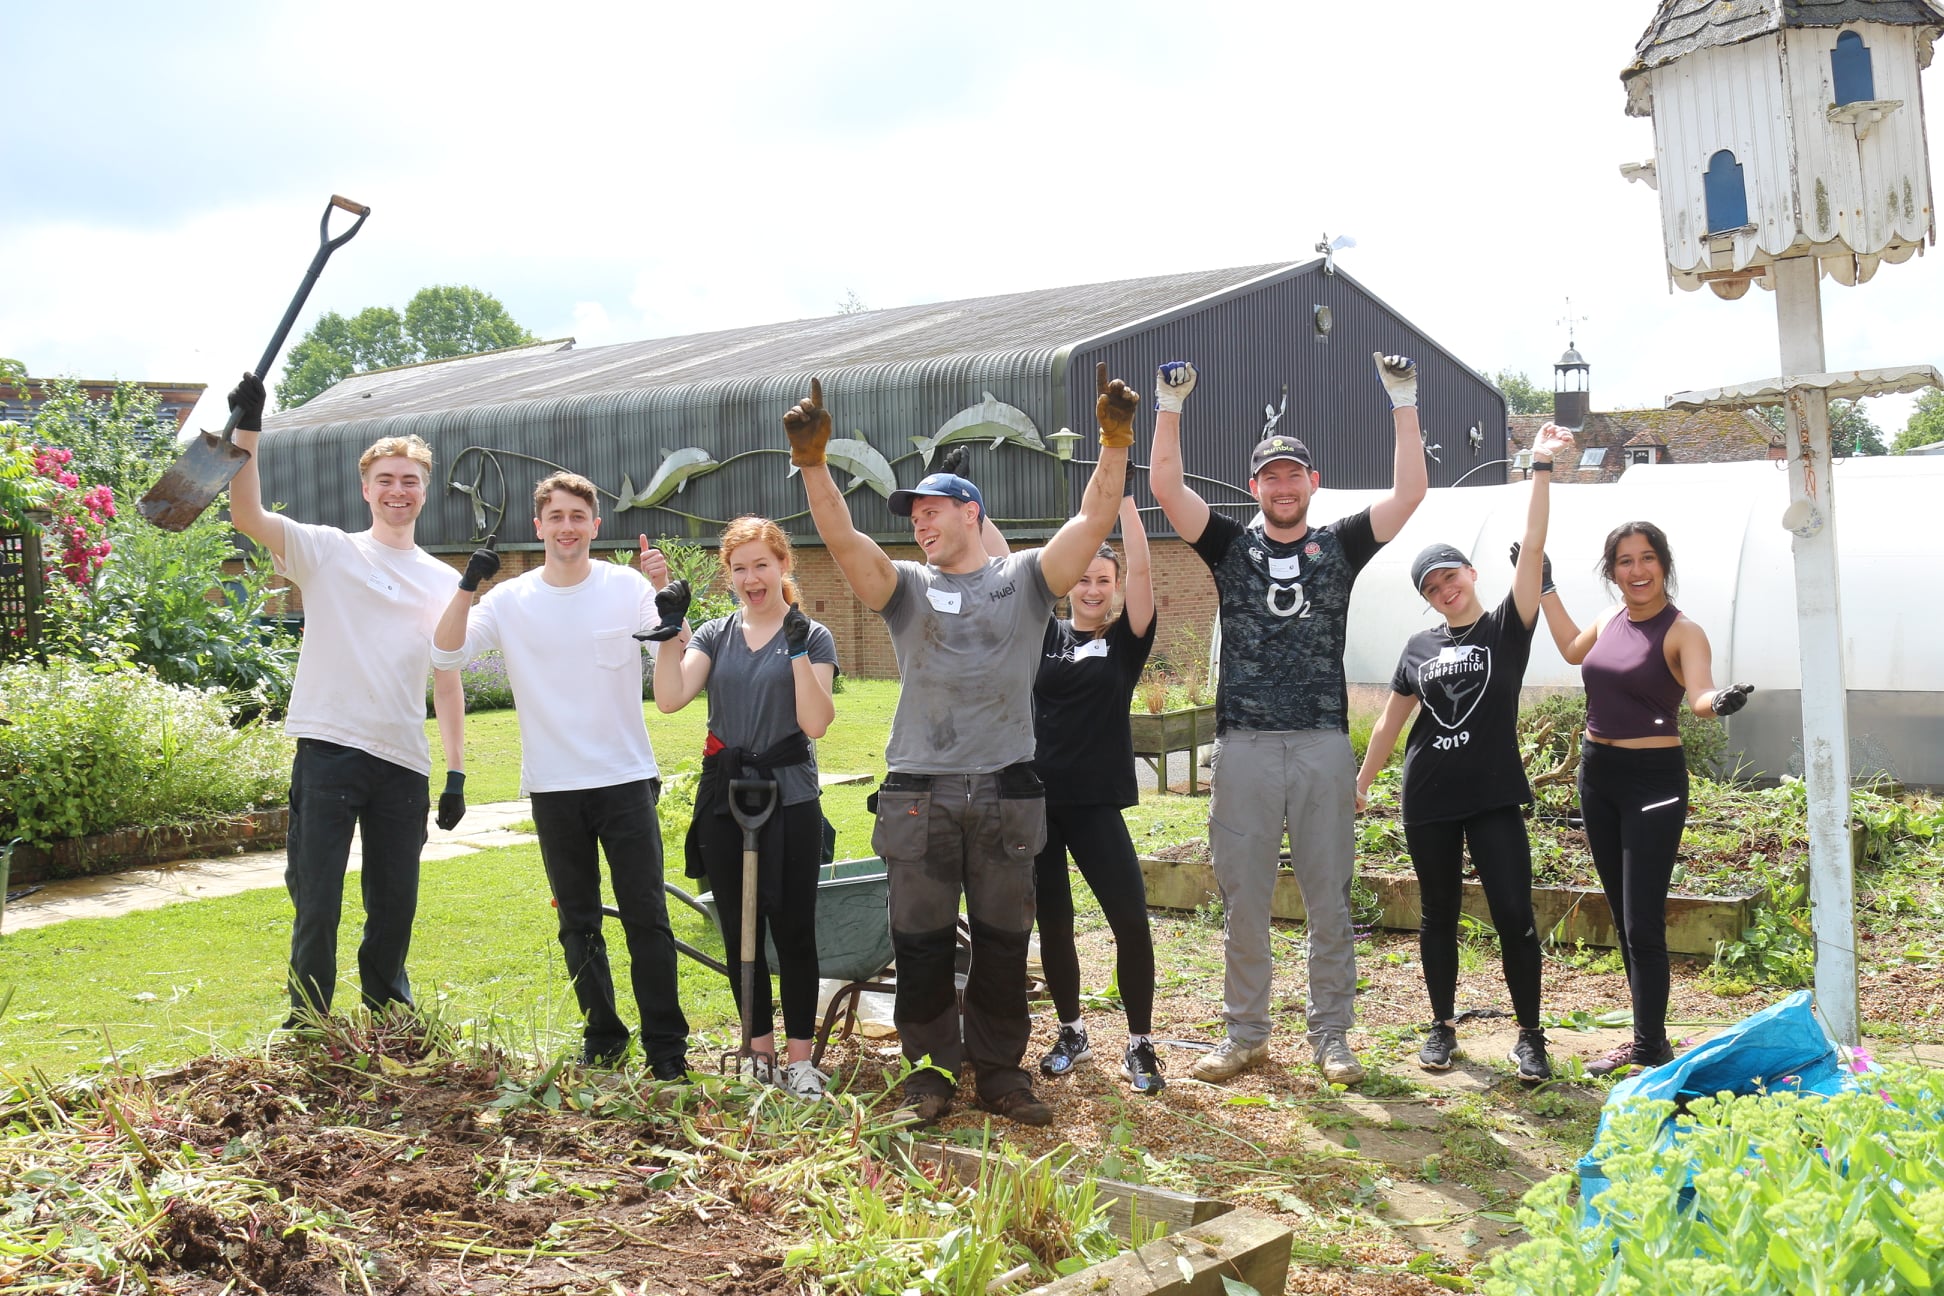 A group of people working at a gardening space for a charity day holding equipment